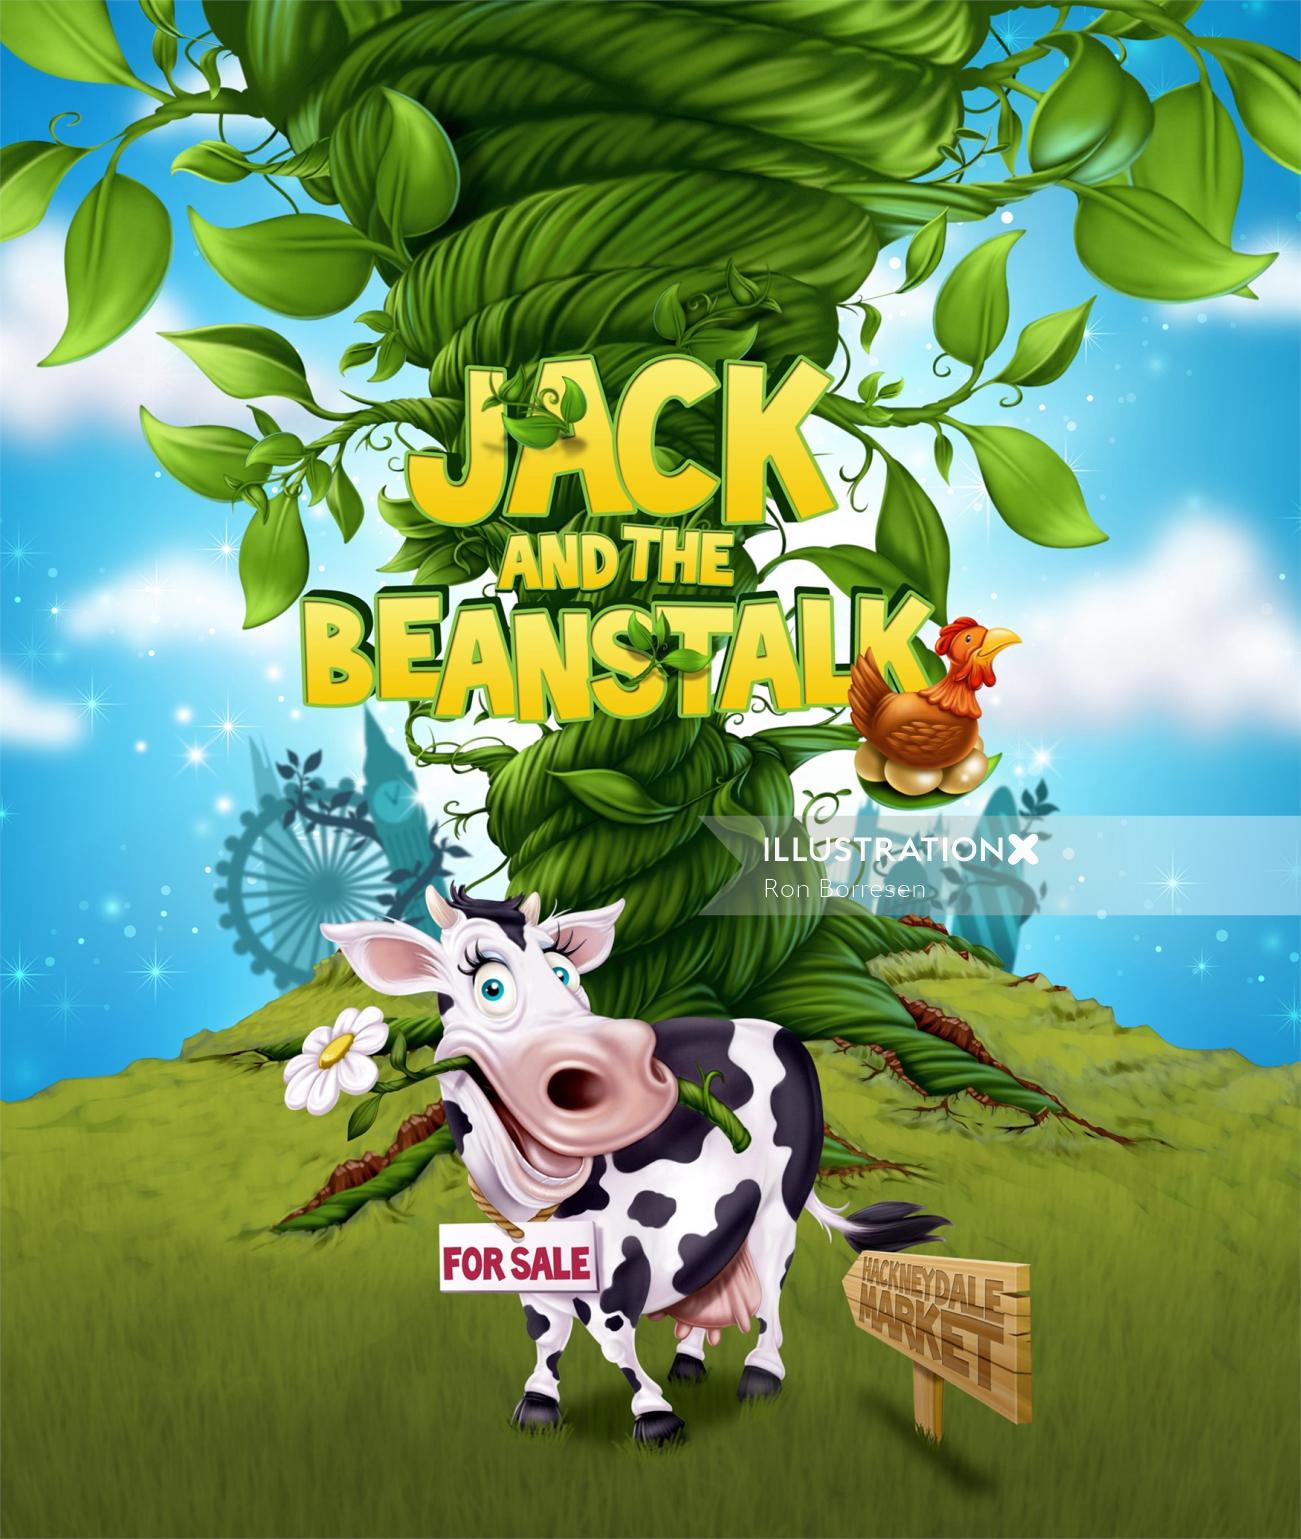 "Jack and the Beans Stalk" book cover design